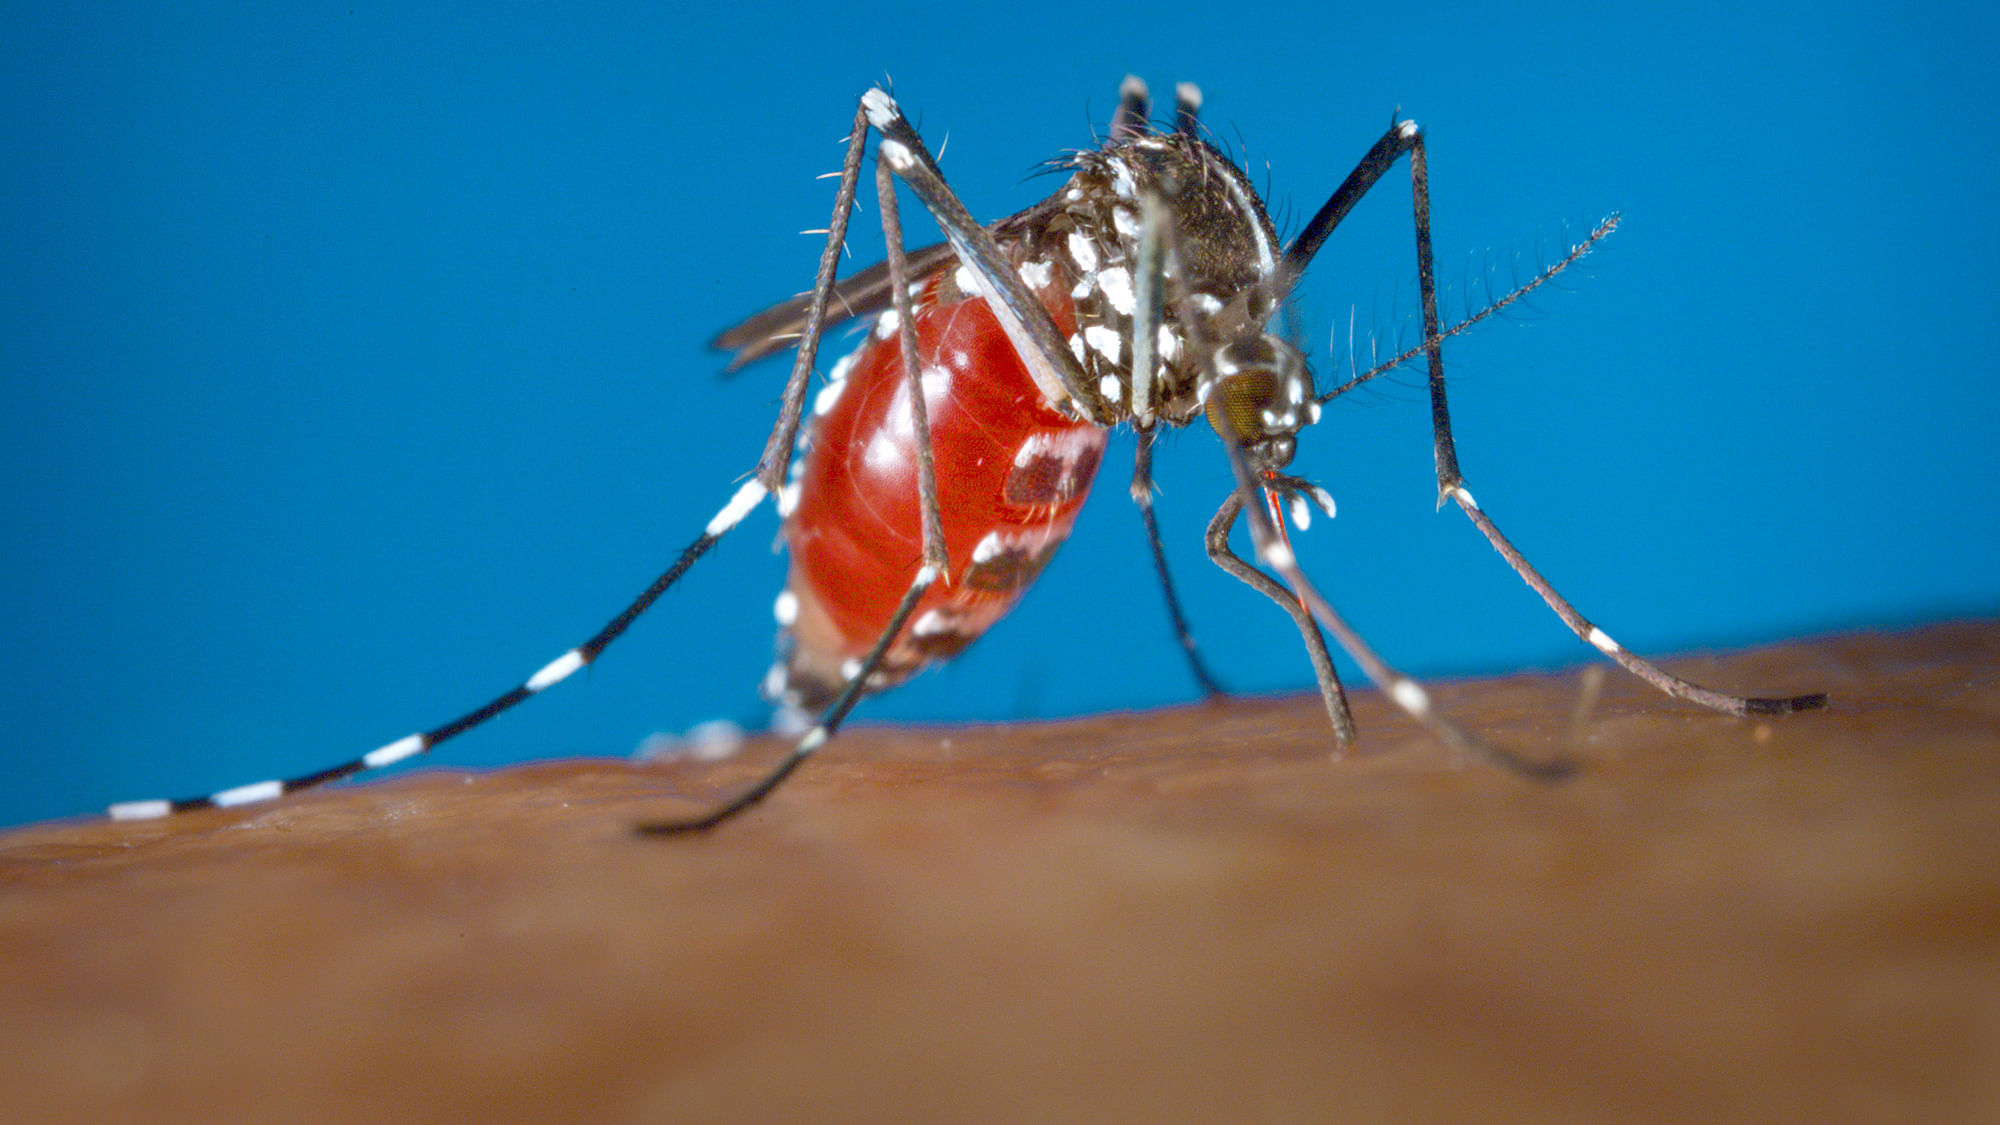 The Zika virus is spread through mosquito bites from Aedes aegypti 